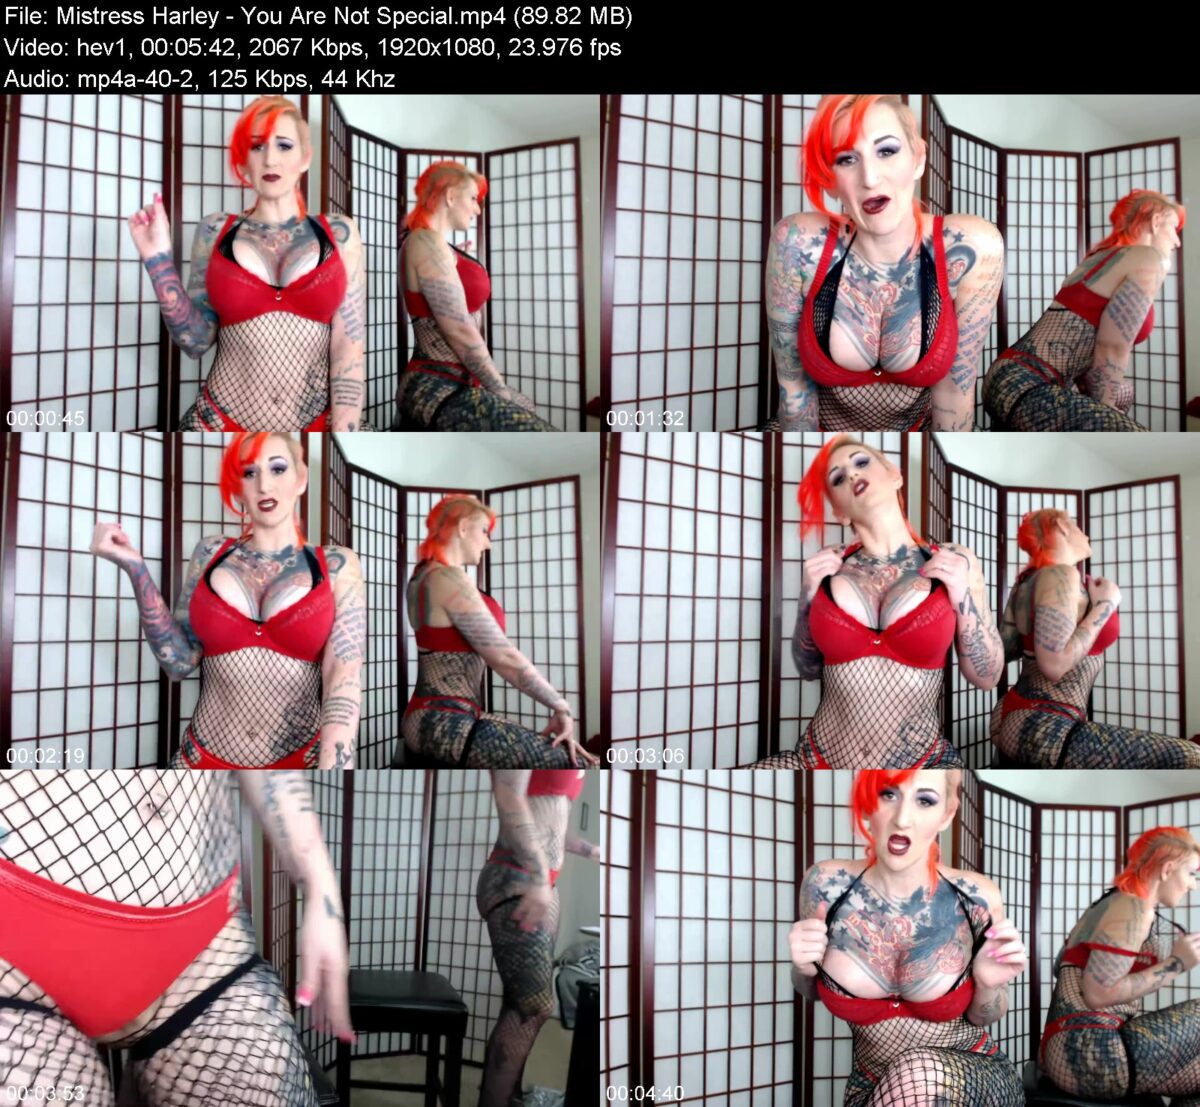 Actress: Mistress Harley. Title and Studio: You Are Not Special